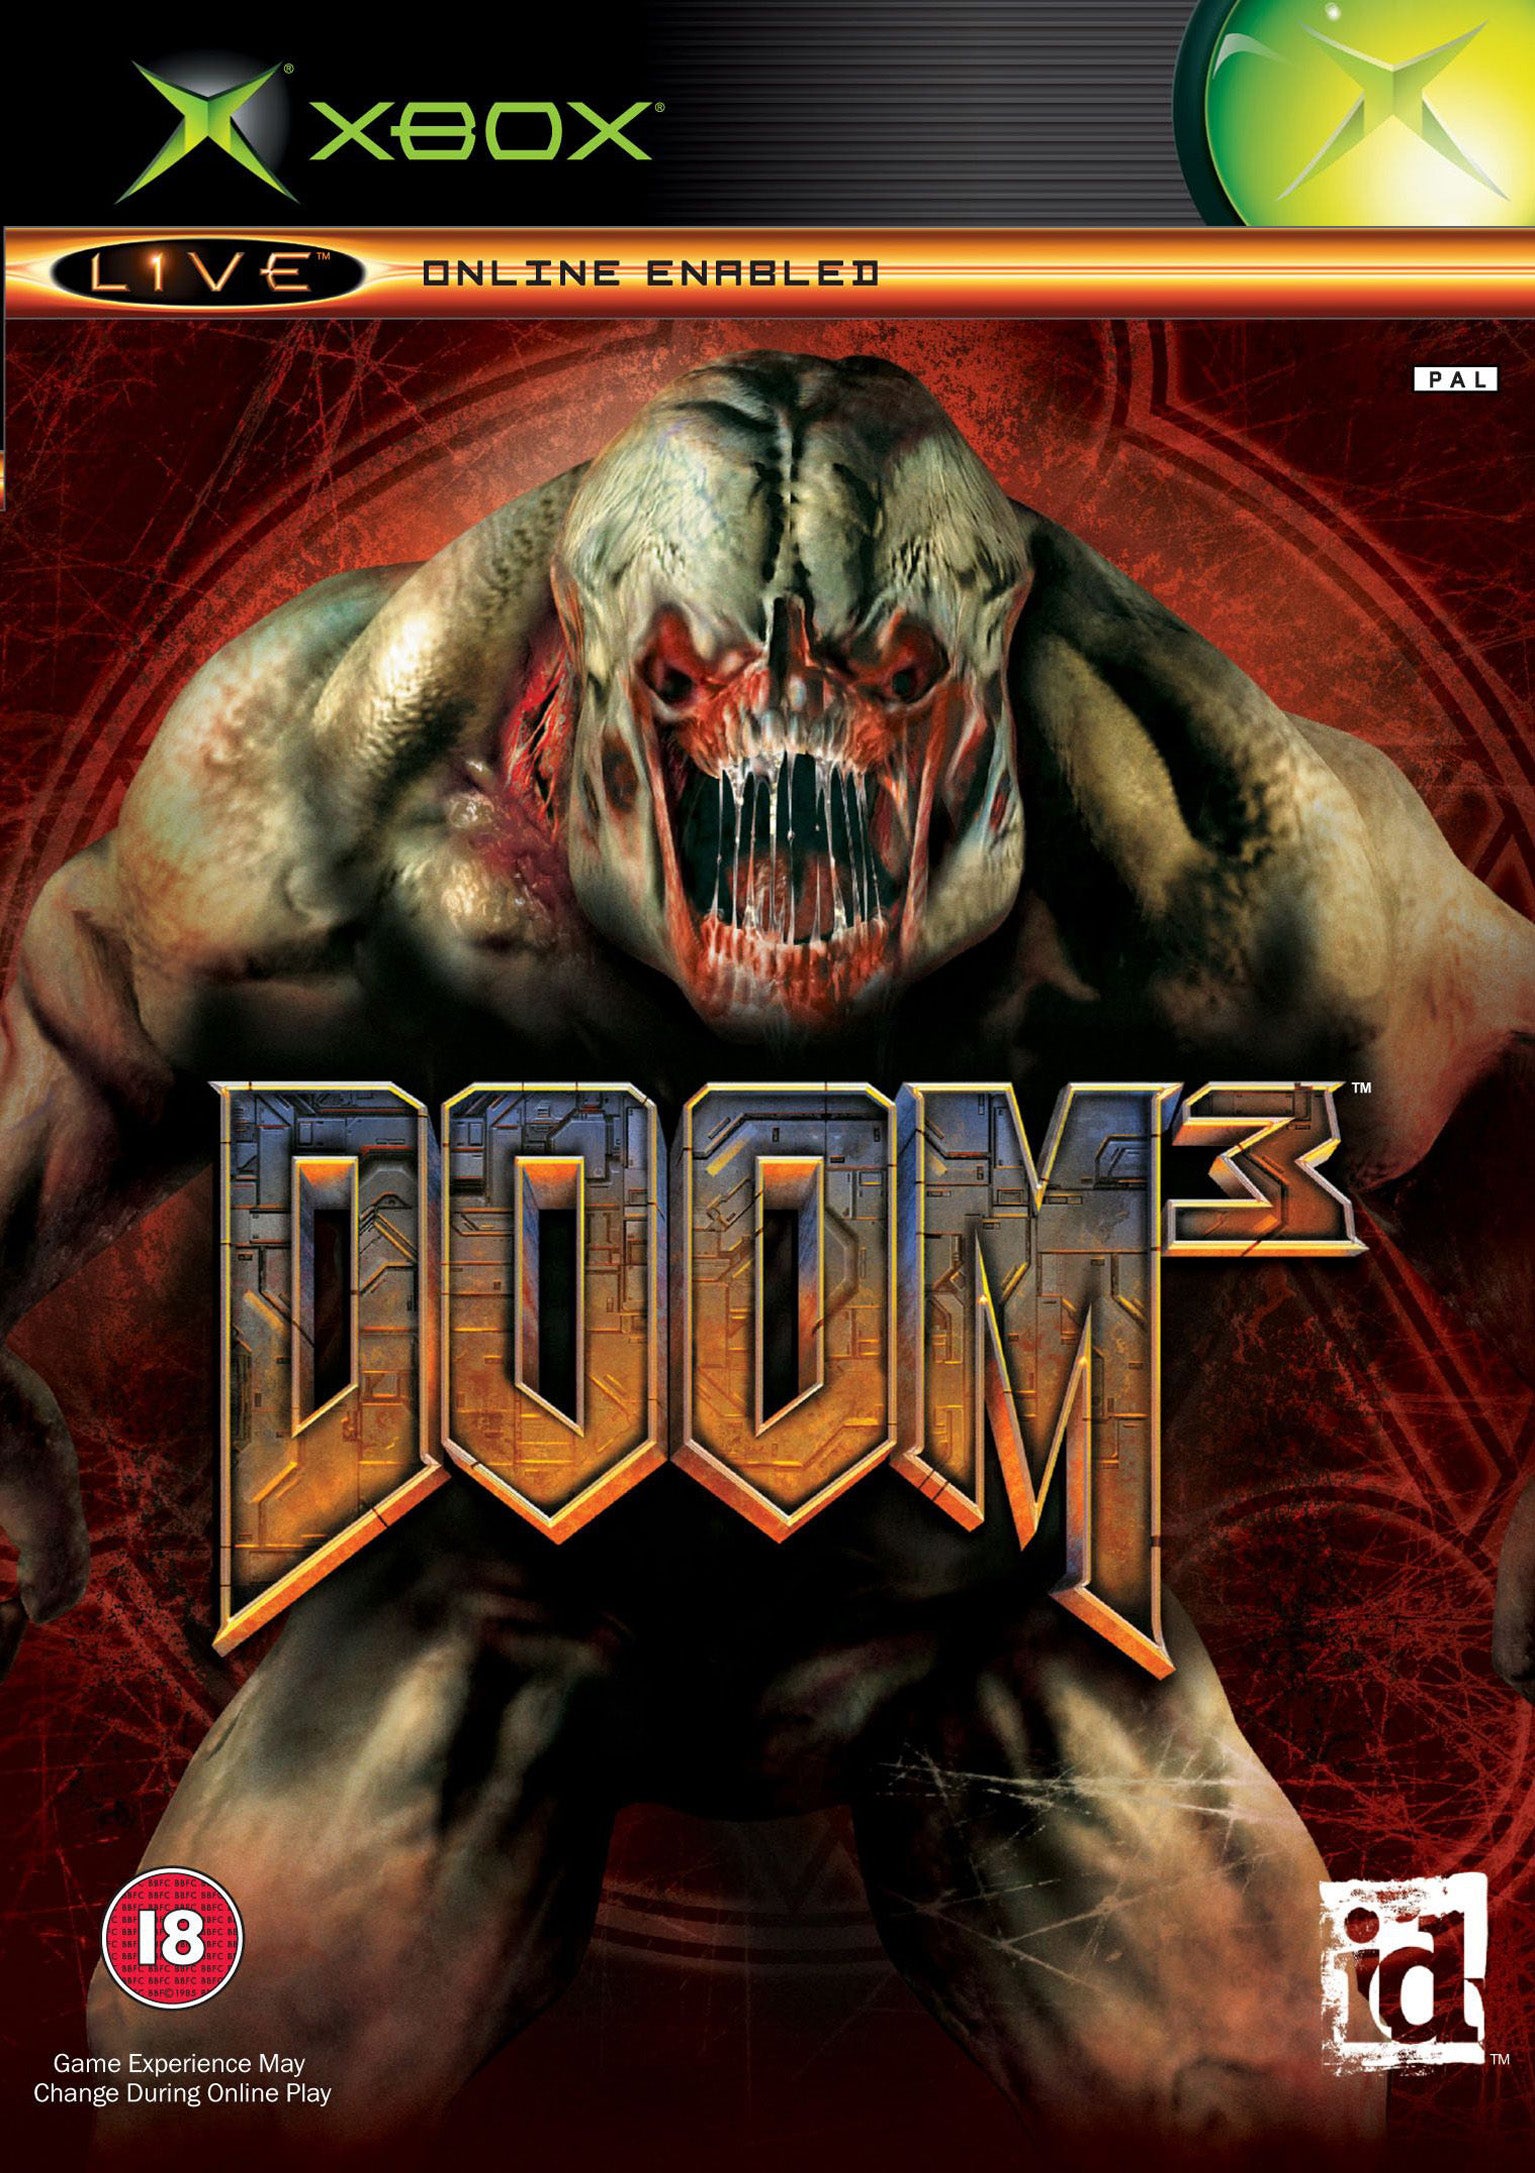 Game | Microsoft XBOX | Doom 3 Limited Collector's Edition